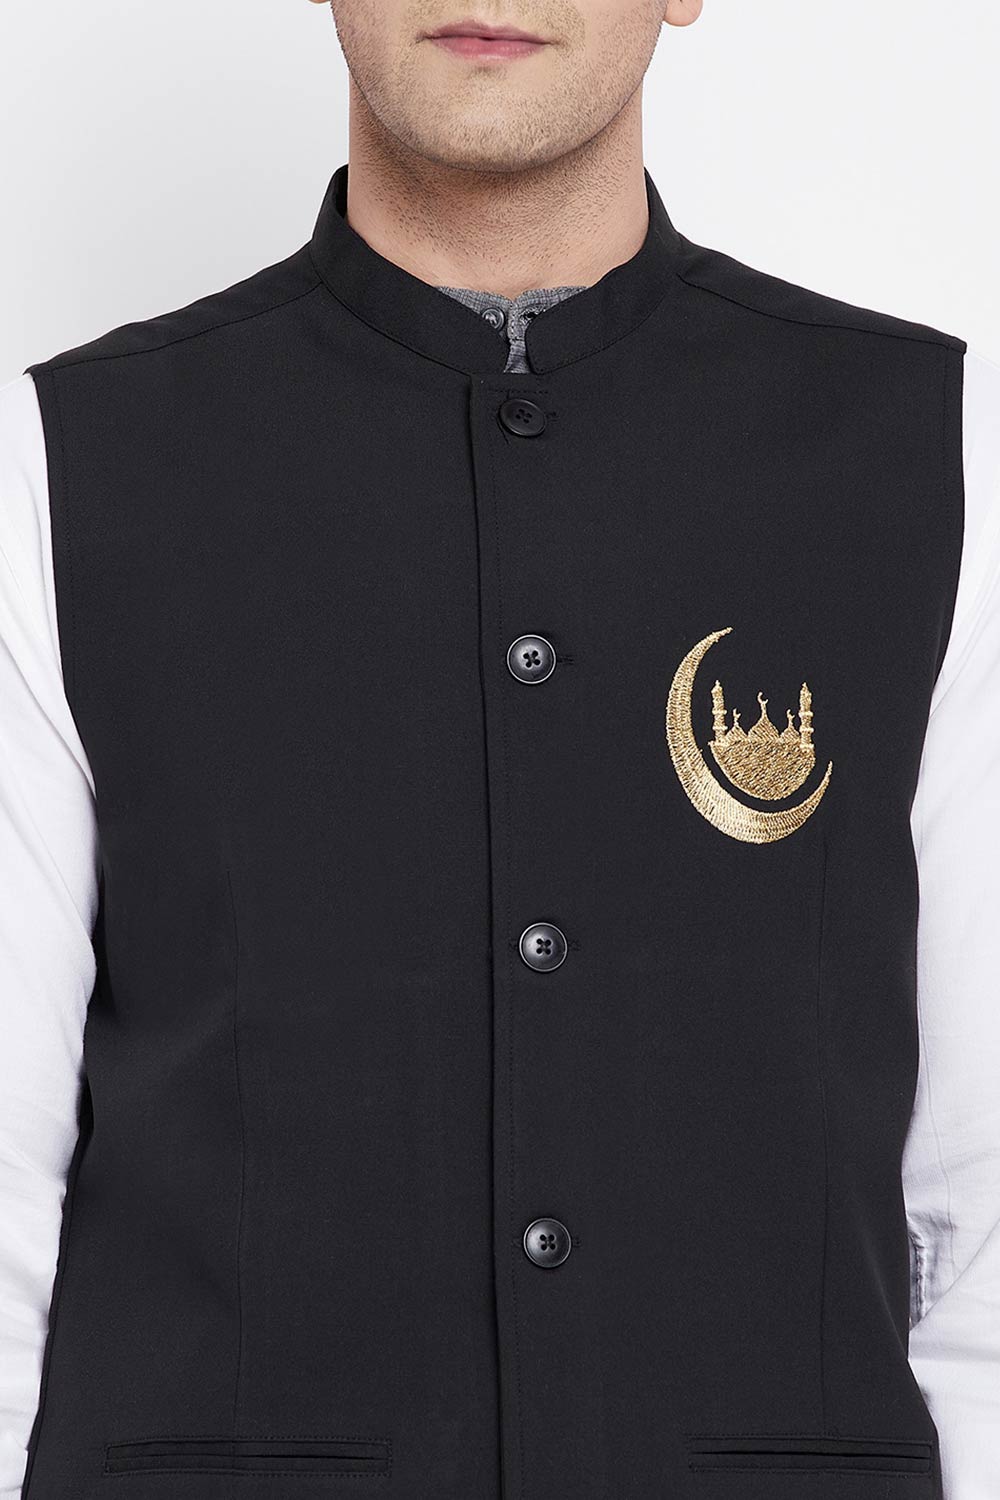 Buy Men's Merino Chand Embroidery Nehru Jacket in Black - Zoom Out